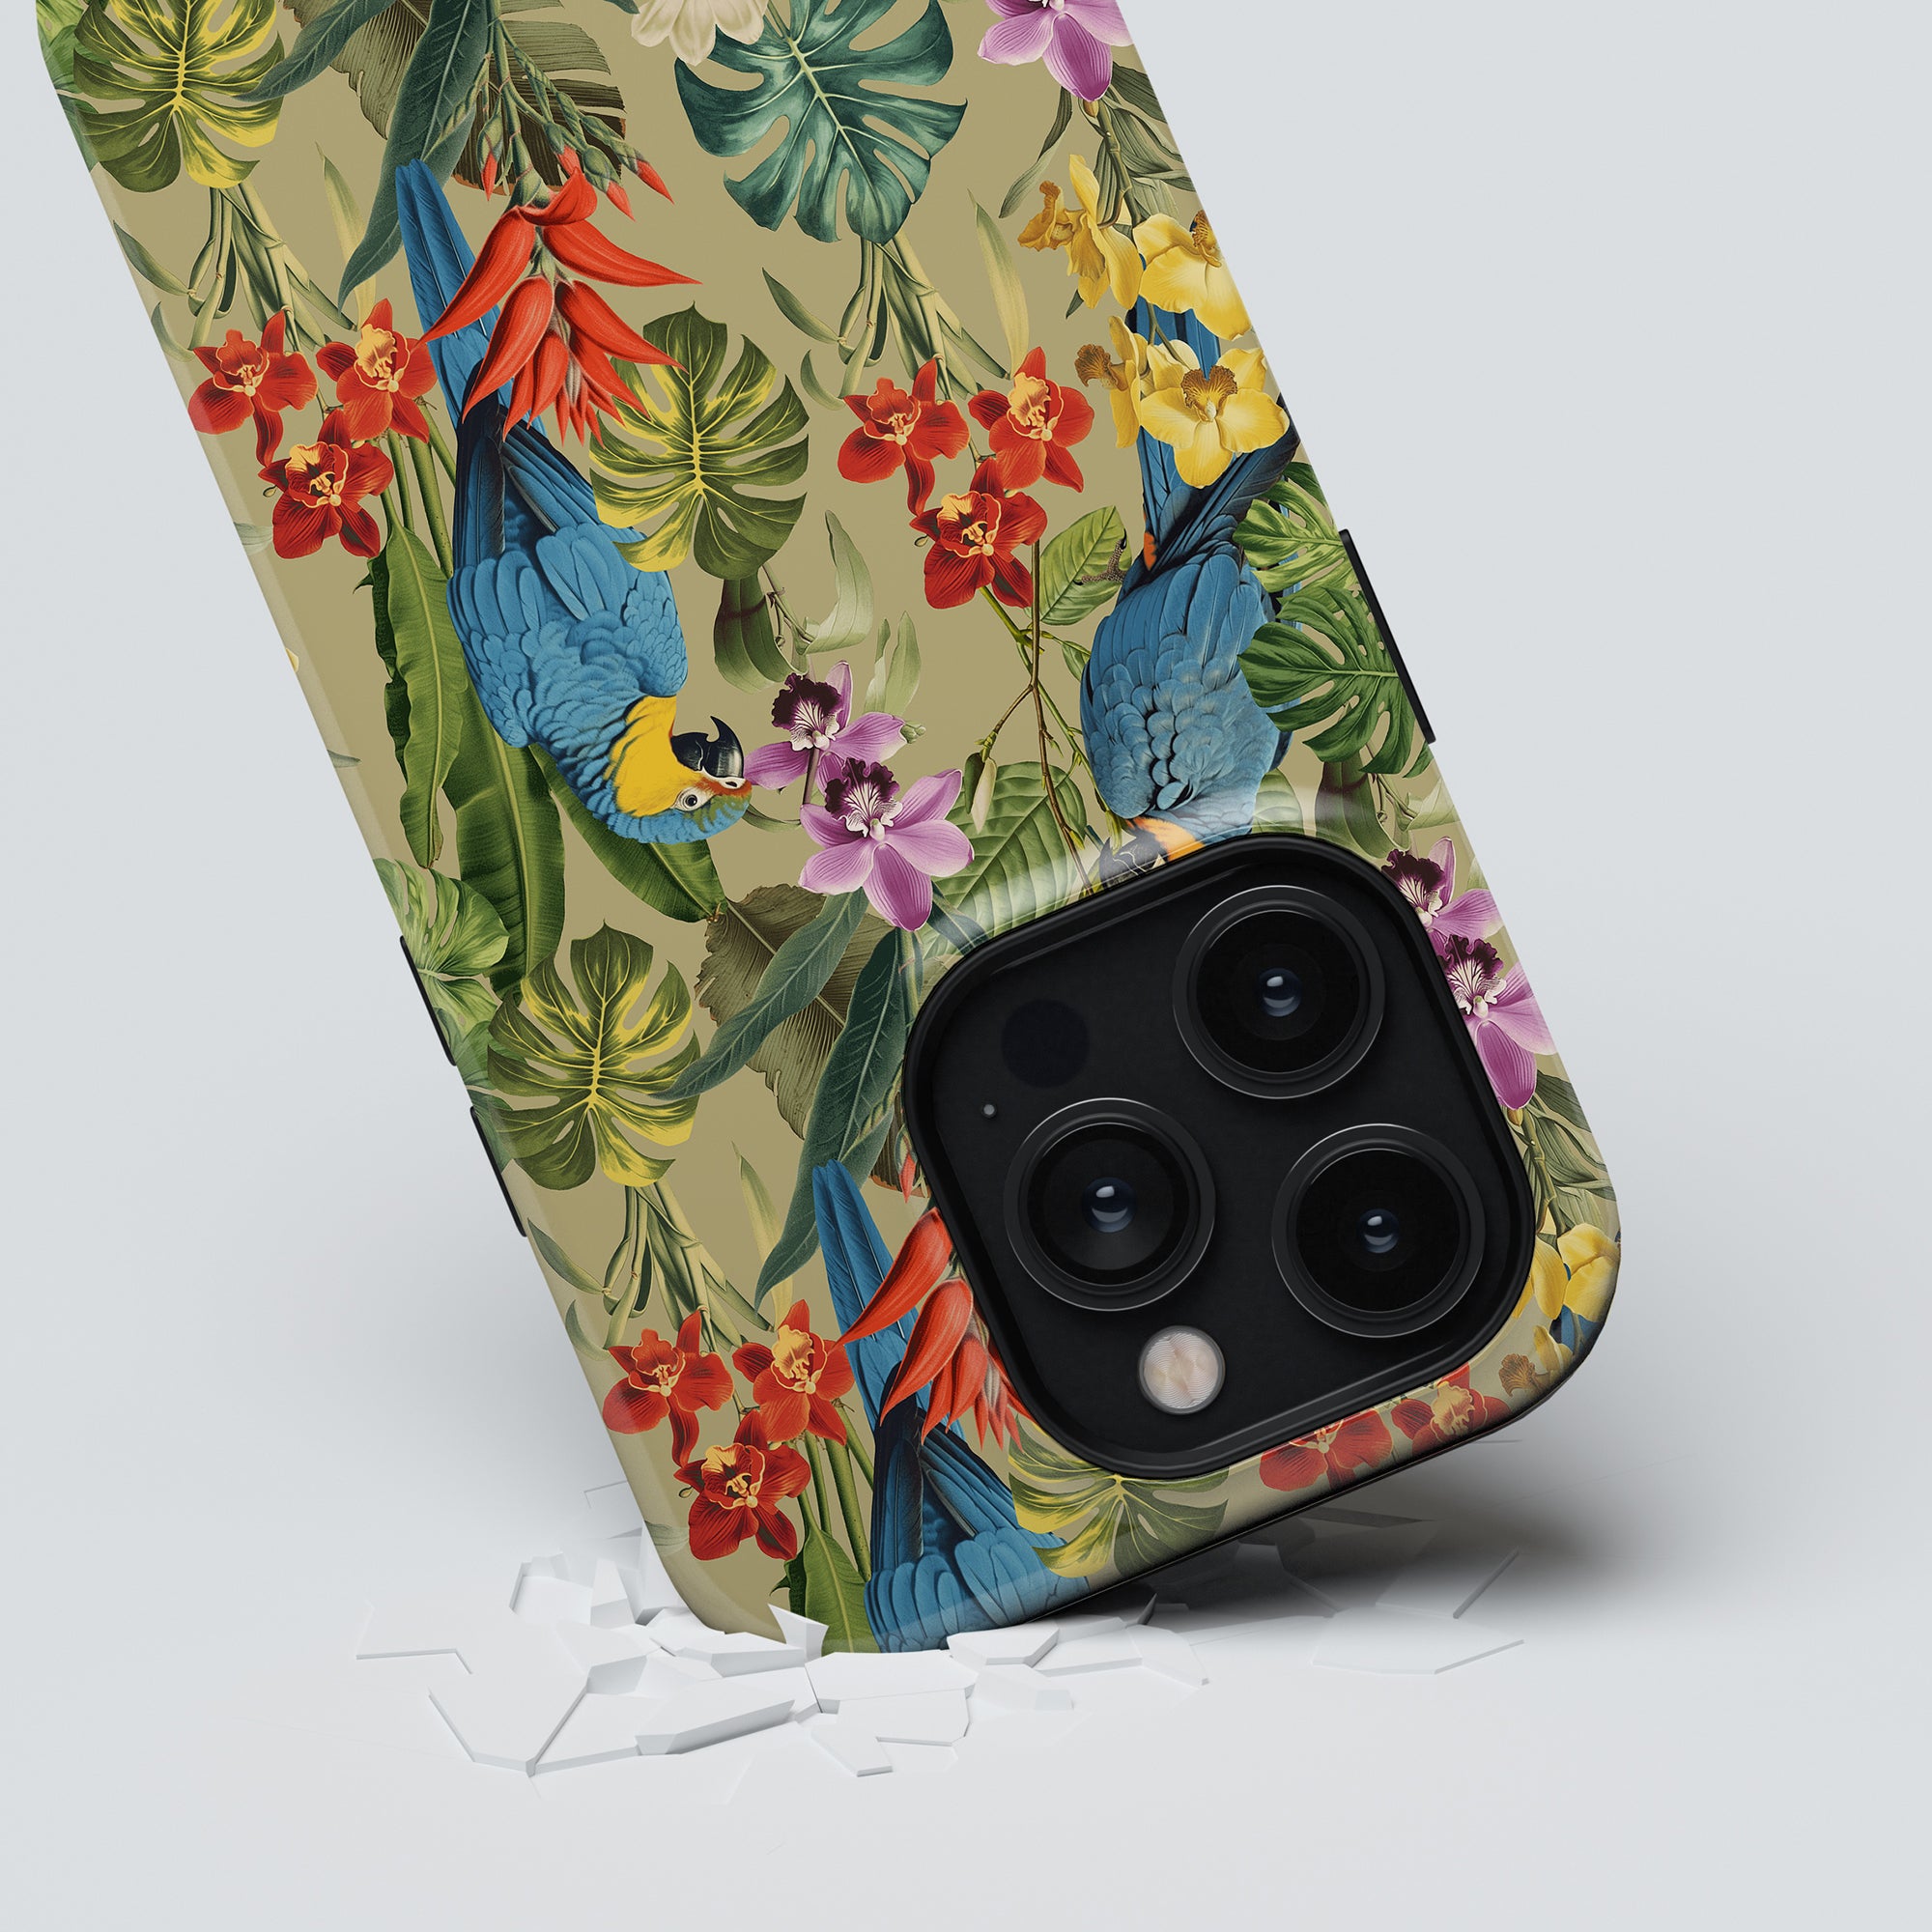 A smartphone with a Verdant Beauty - Tough Case from the Birds Collection, displaying vibrant parrots and flowers, is placed on a light surface with some white bits nearby. The phone's three rear camera lenses are visible.